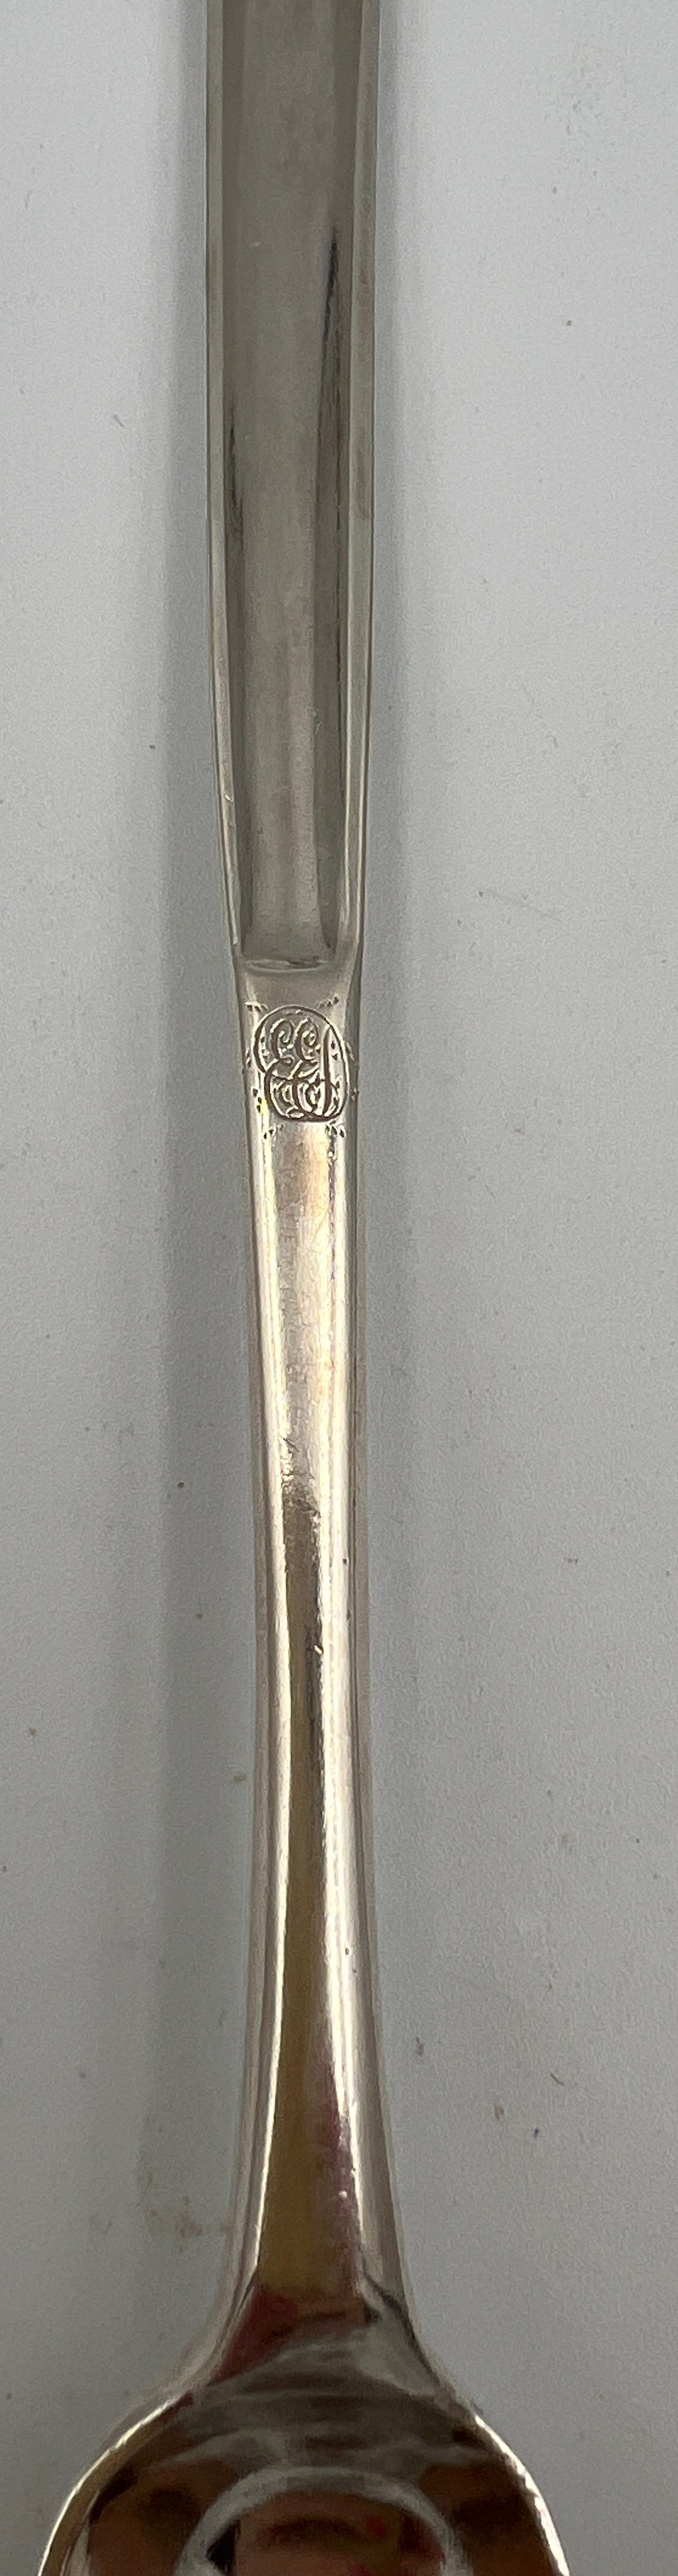 A silver marrow scoop London 1786, maker probably Thomas Northcote. Weight 39gm. - Image 2 of 4